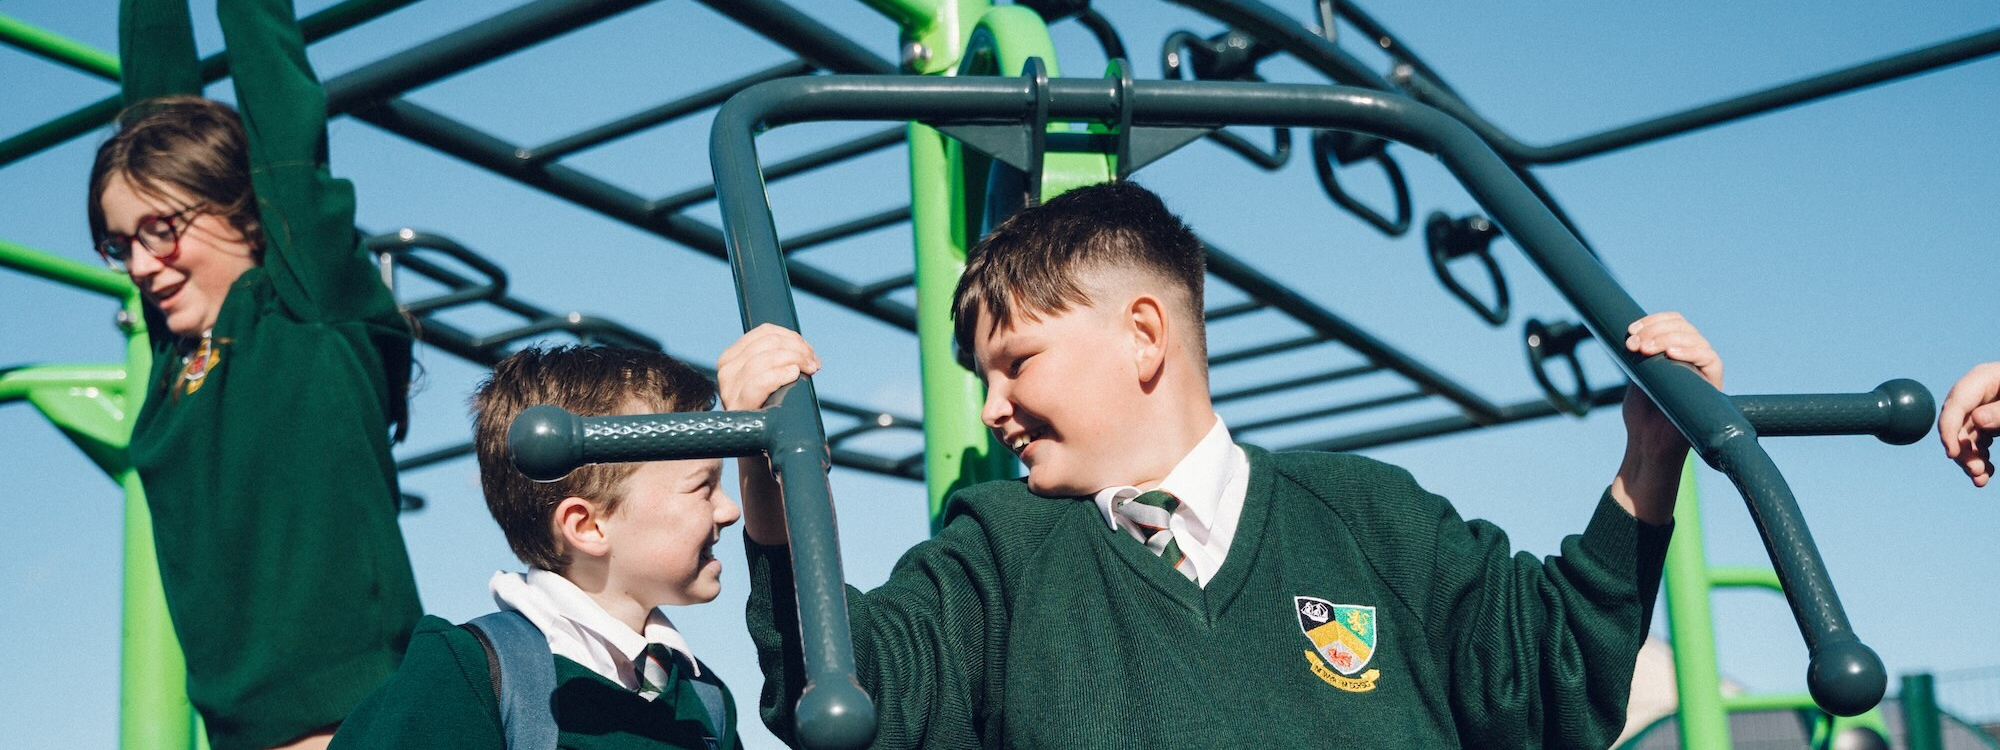 Two students in the playground